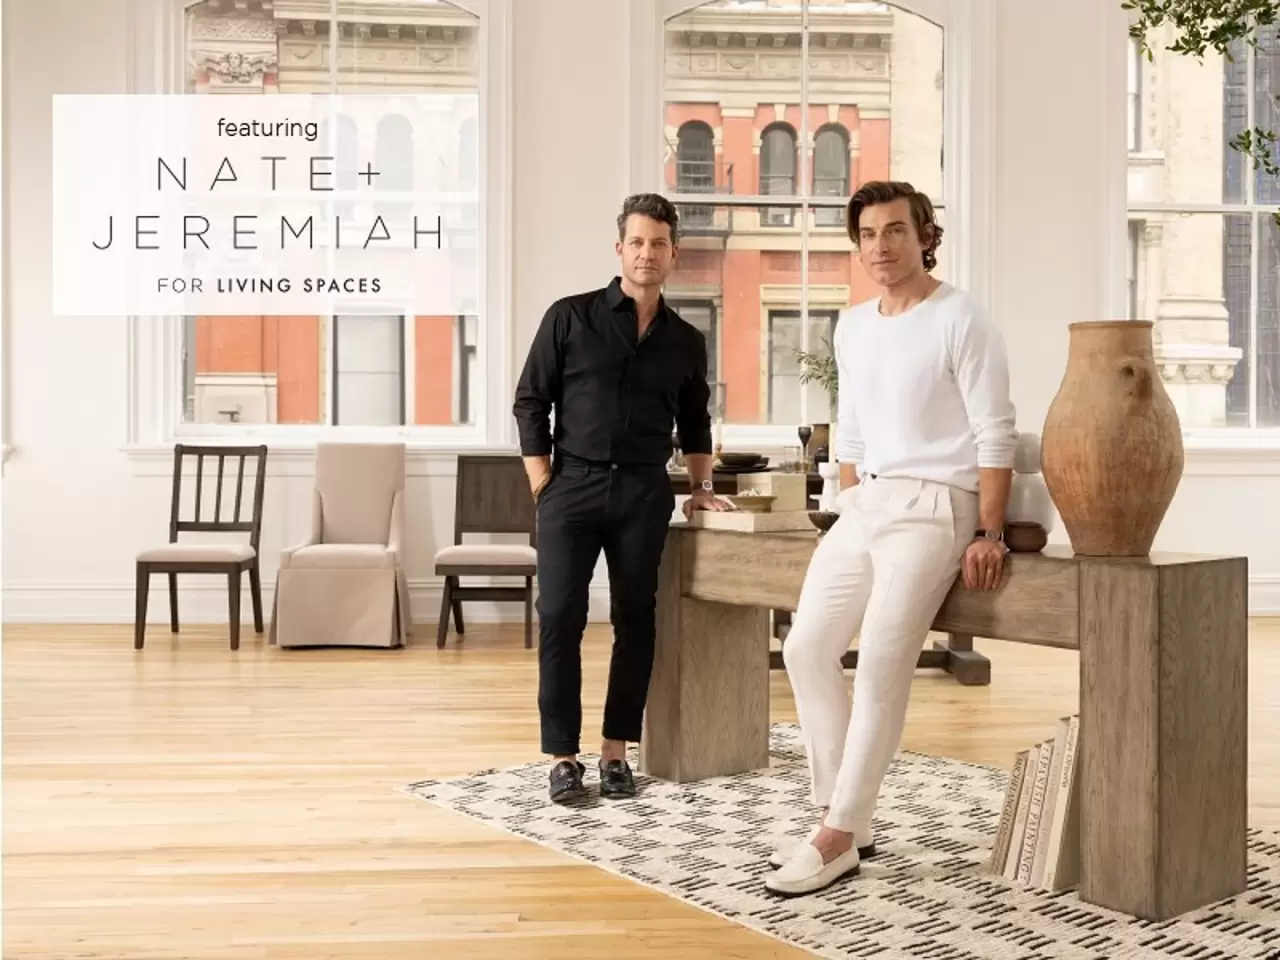 Celebrity Designers Nate Berkus and Jeremiah Brent Launch Their Latest Fall Line in Collaboration with Furnishings Retailer Living Spaces img#1